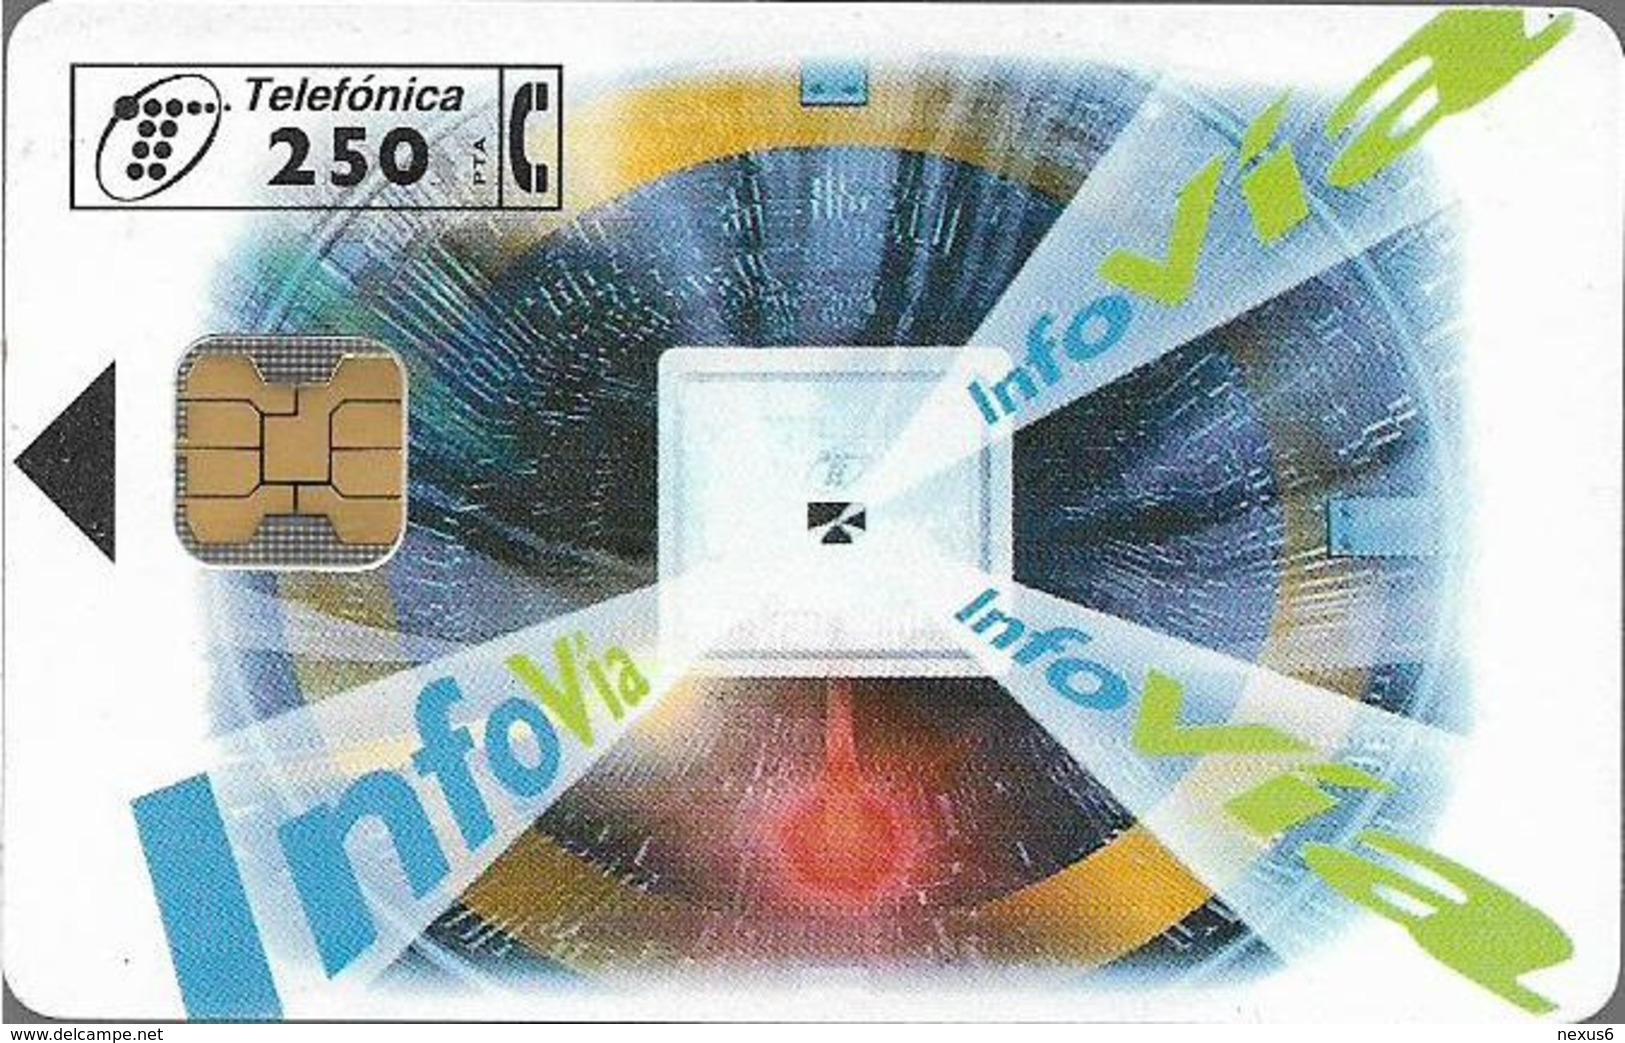 Spain - Telefónica - Simo Tci-95 - G-010 - 11.1995, 250PTA, 7.000ex, Mint (check Photos!) - Gift Issues